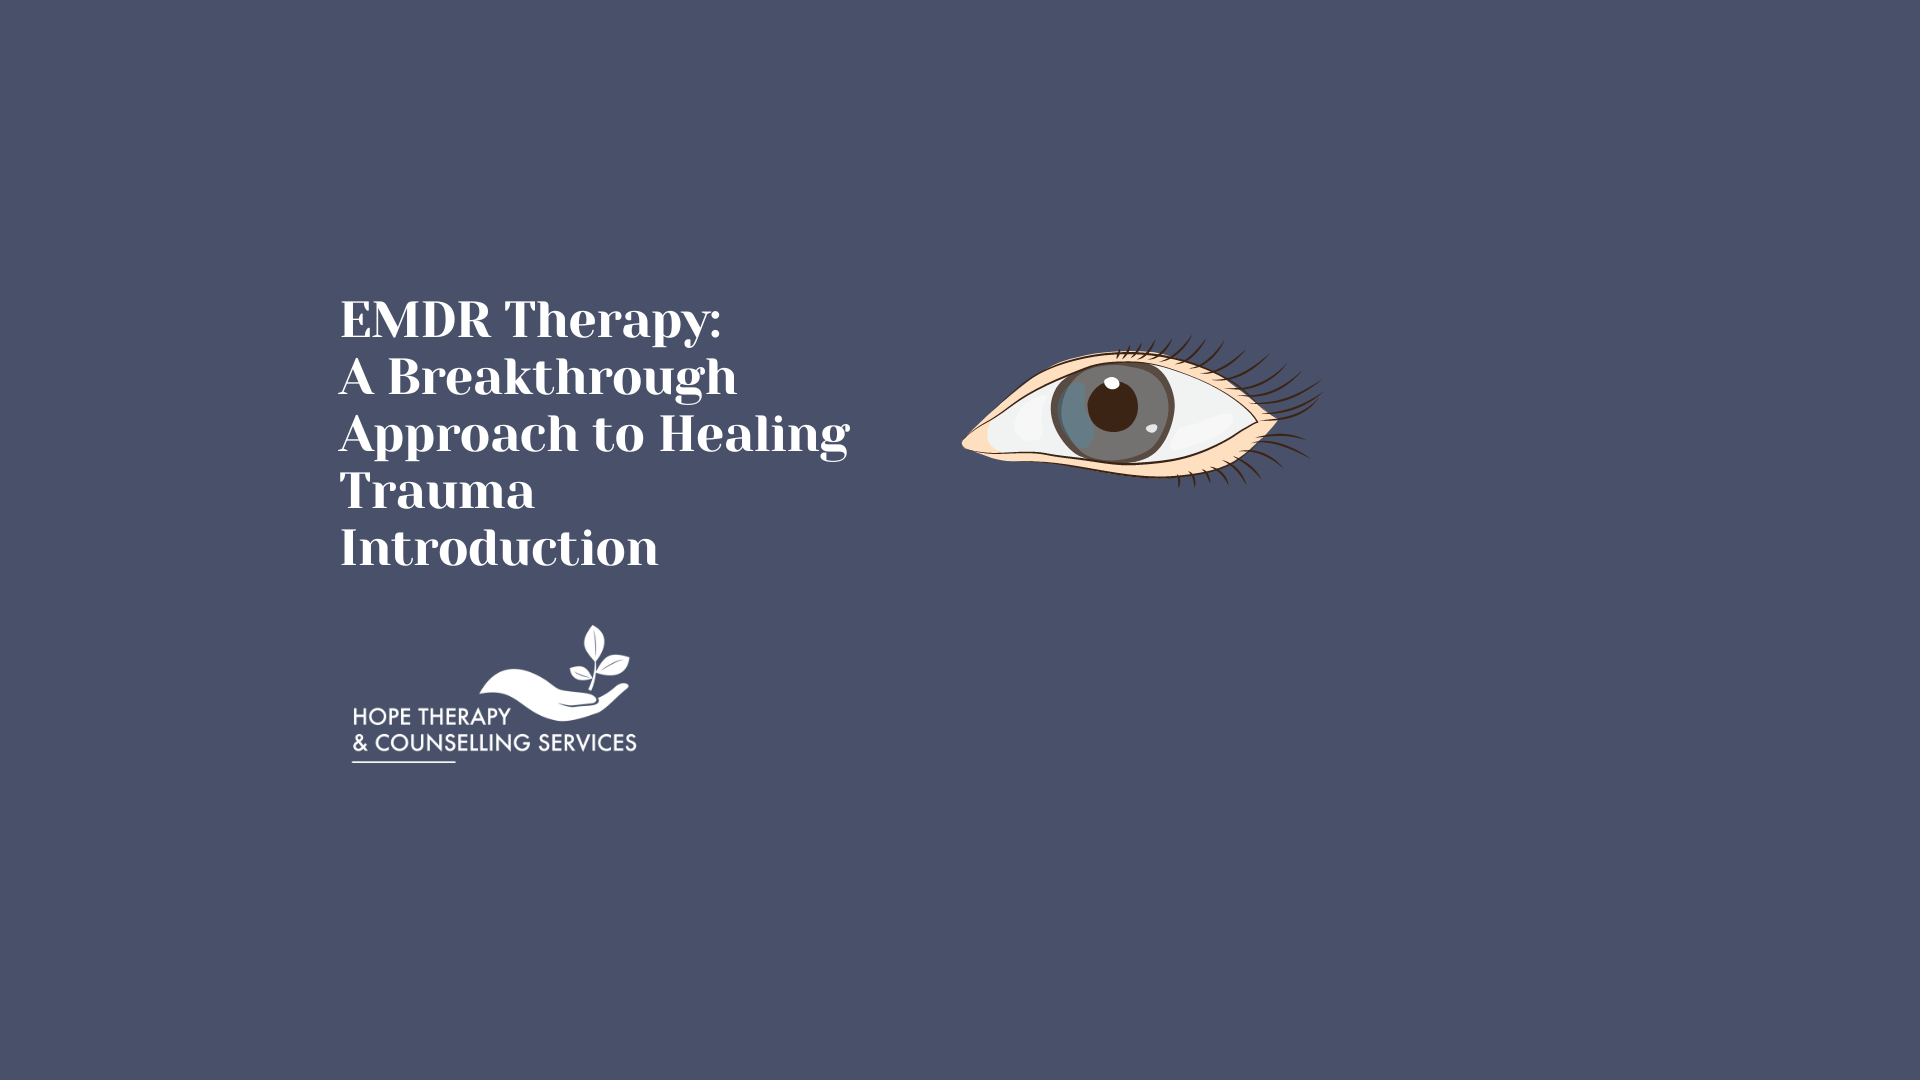 EMDR Therapy: A Breakthrough Approach to Healing Trauma